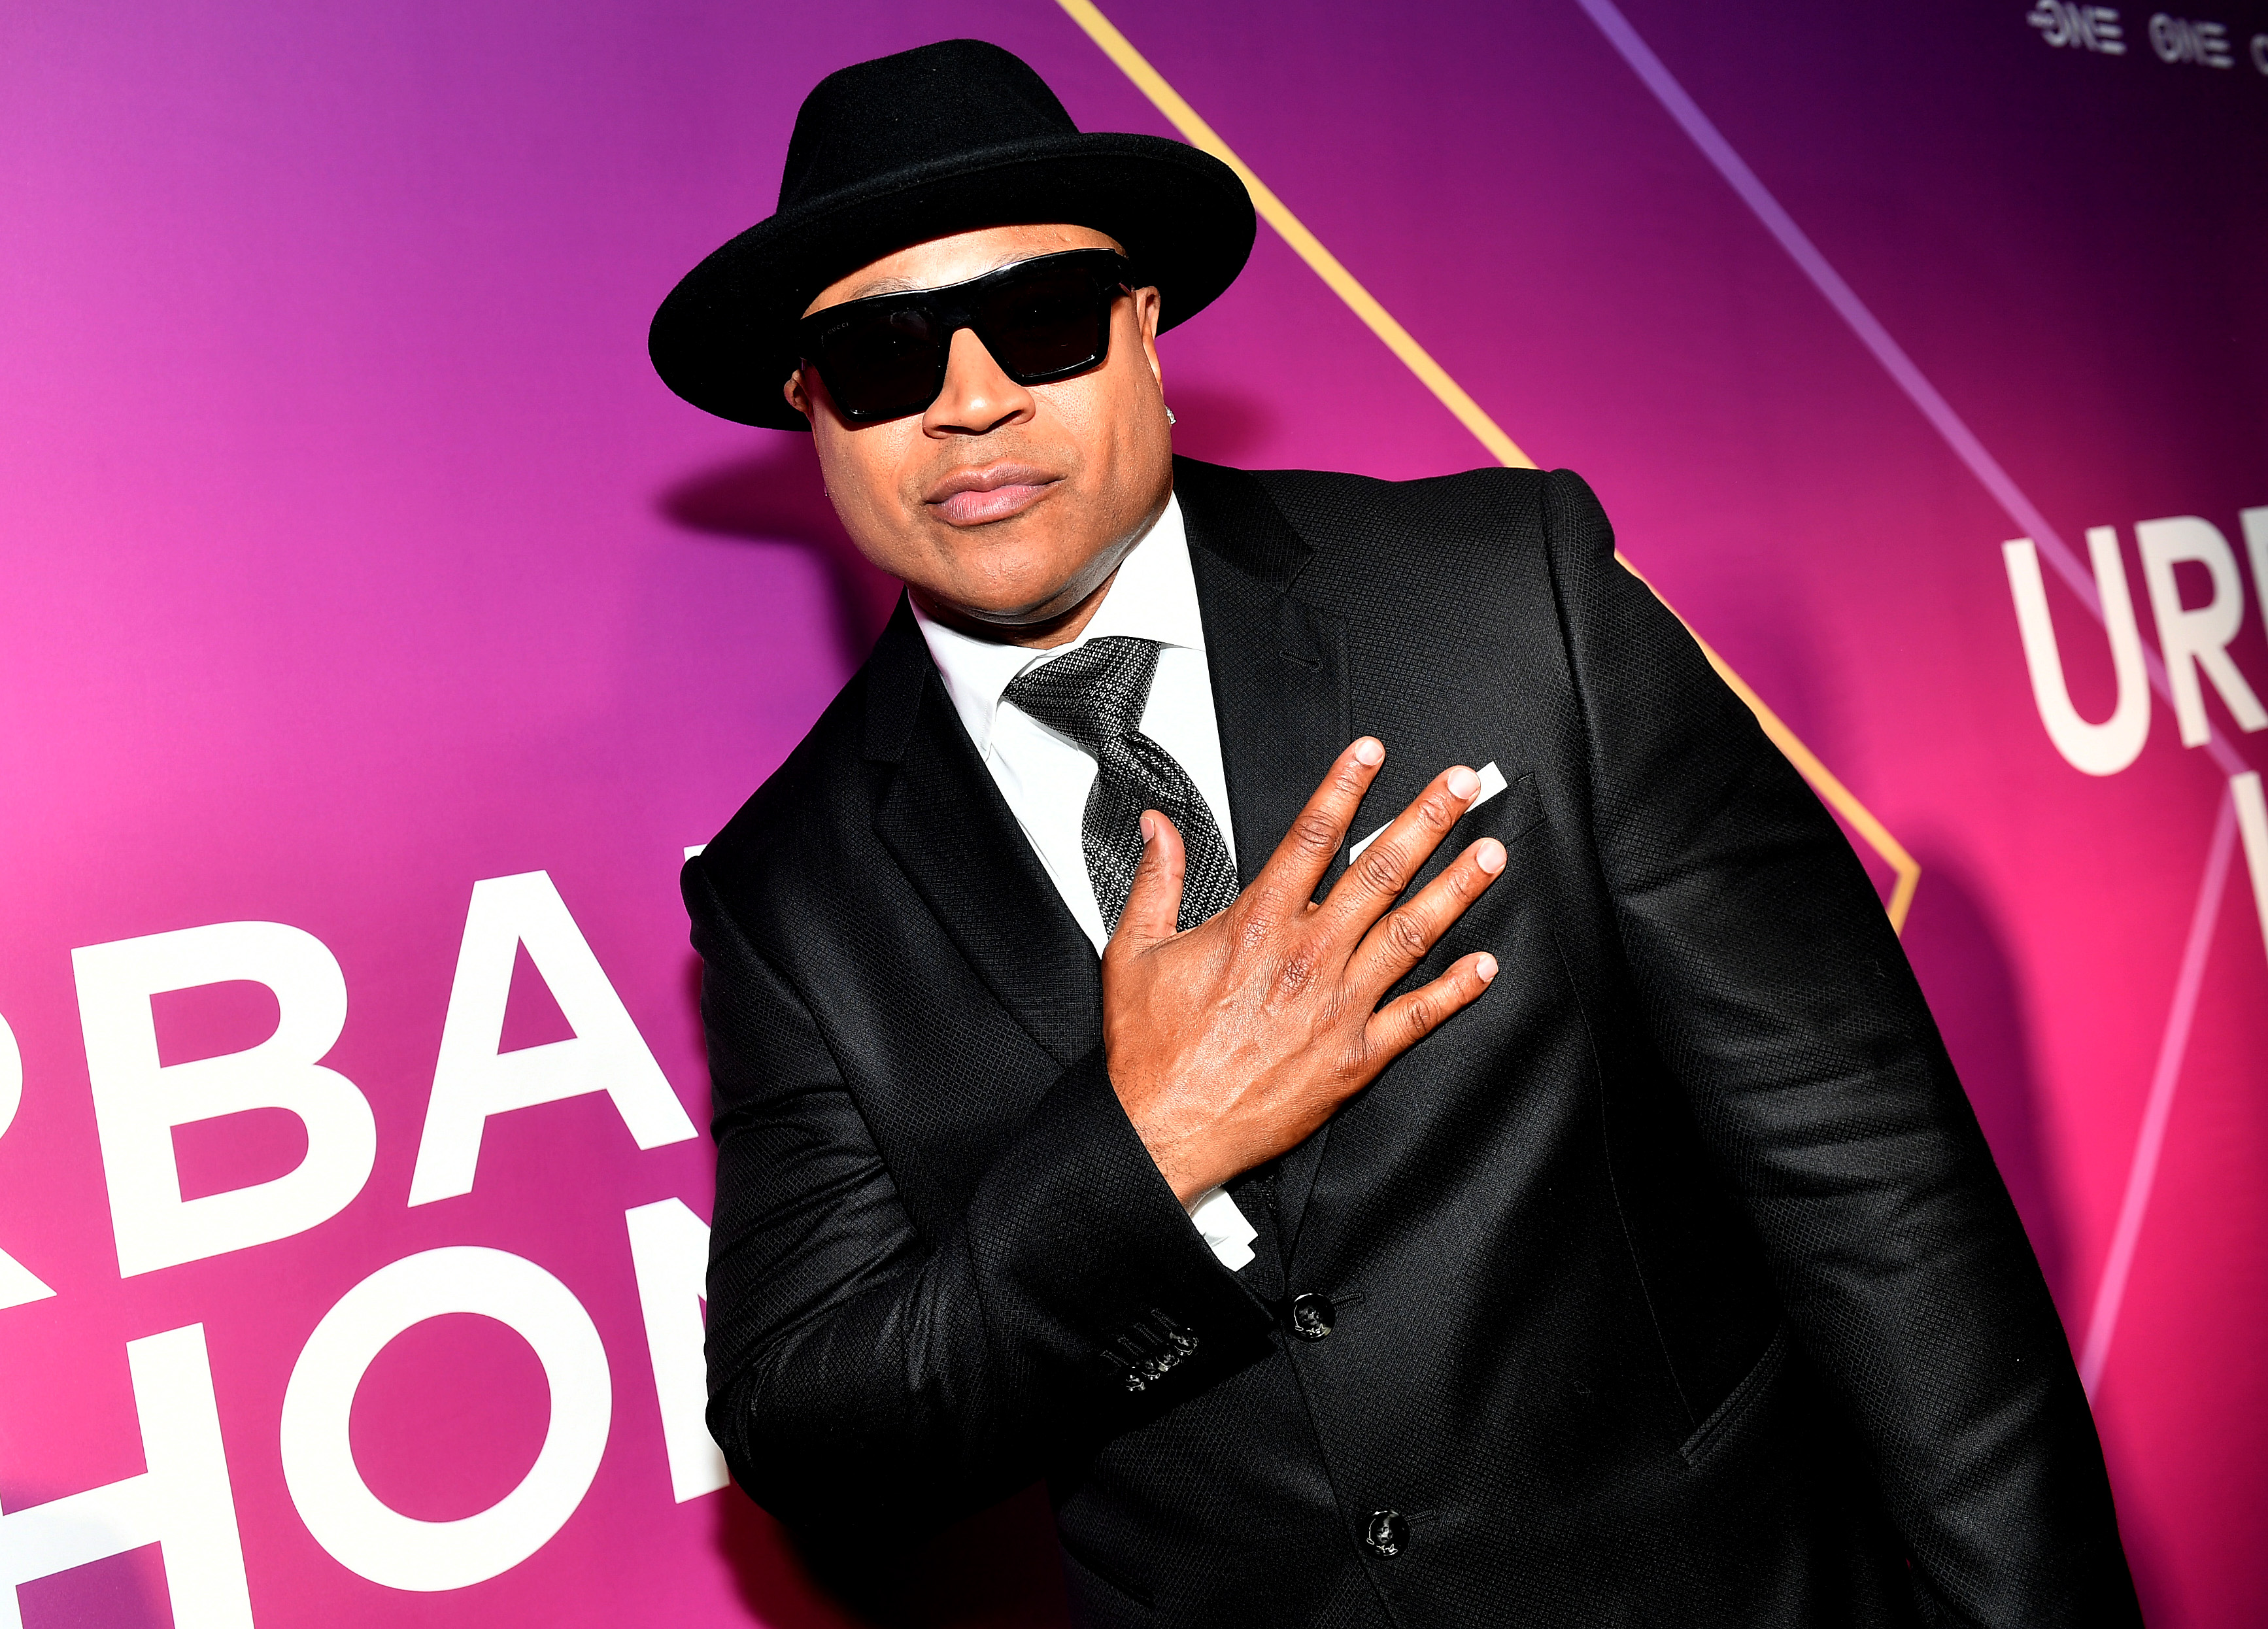 LL COOL J Says Being Sampled By The Notorious B.I.G. & Rick Ross Makes Him A “True Artist”